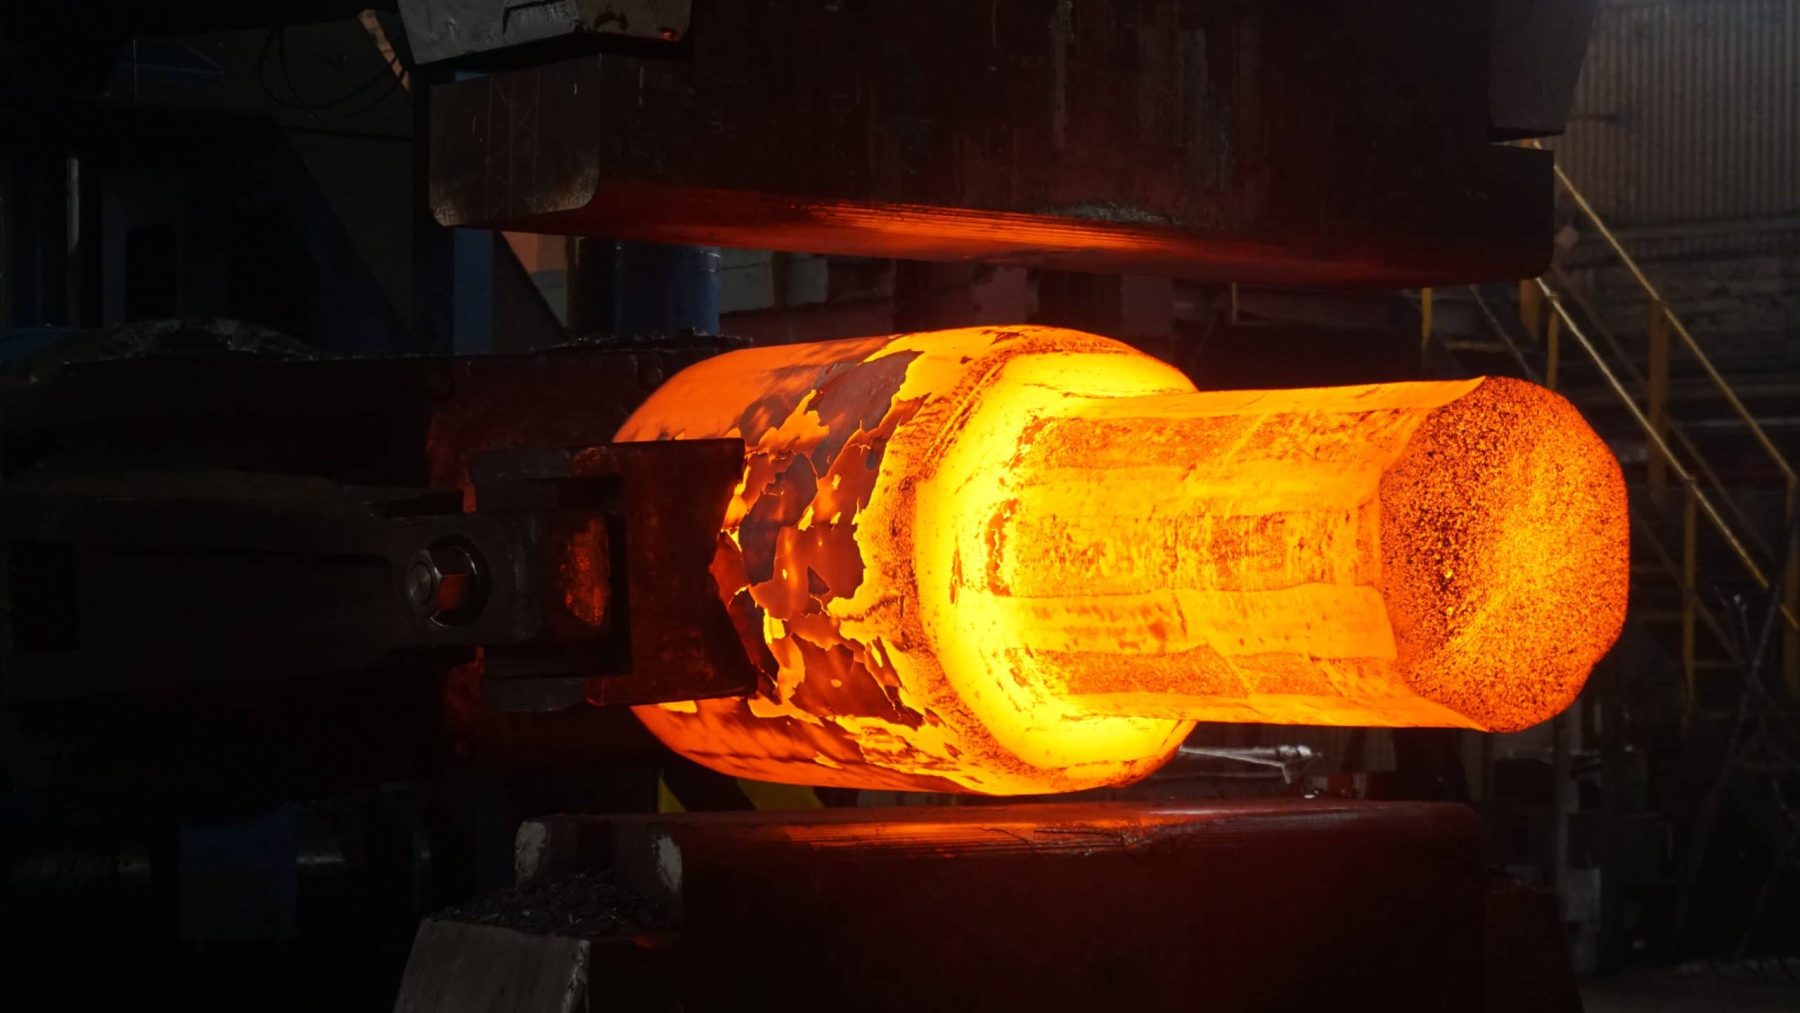 Metal forging and the demand for global infrastructure